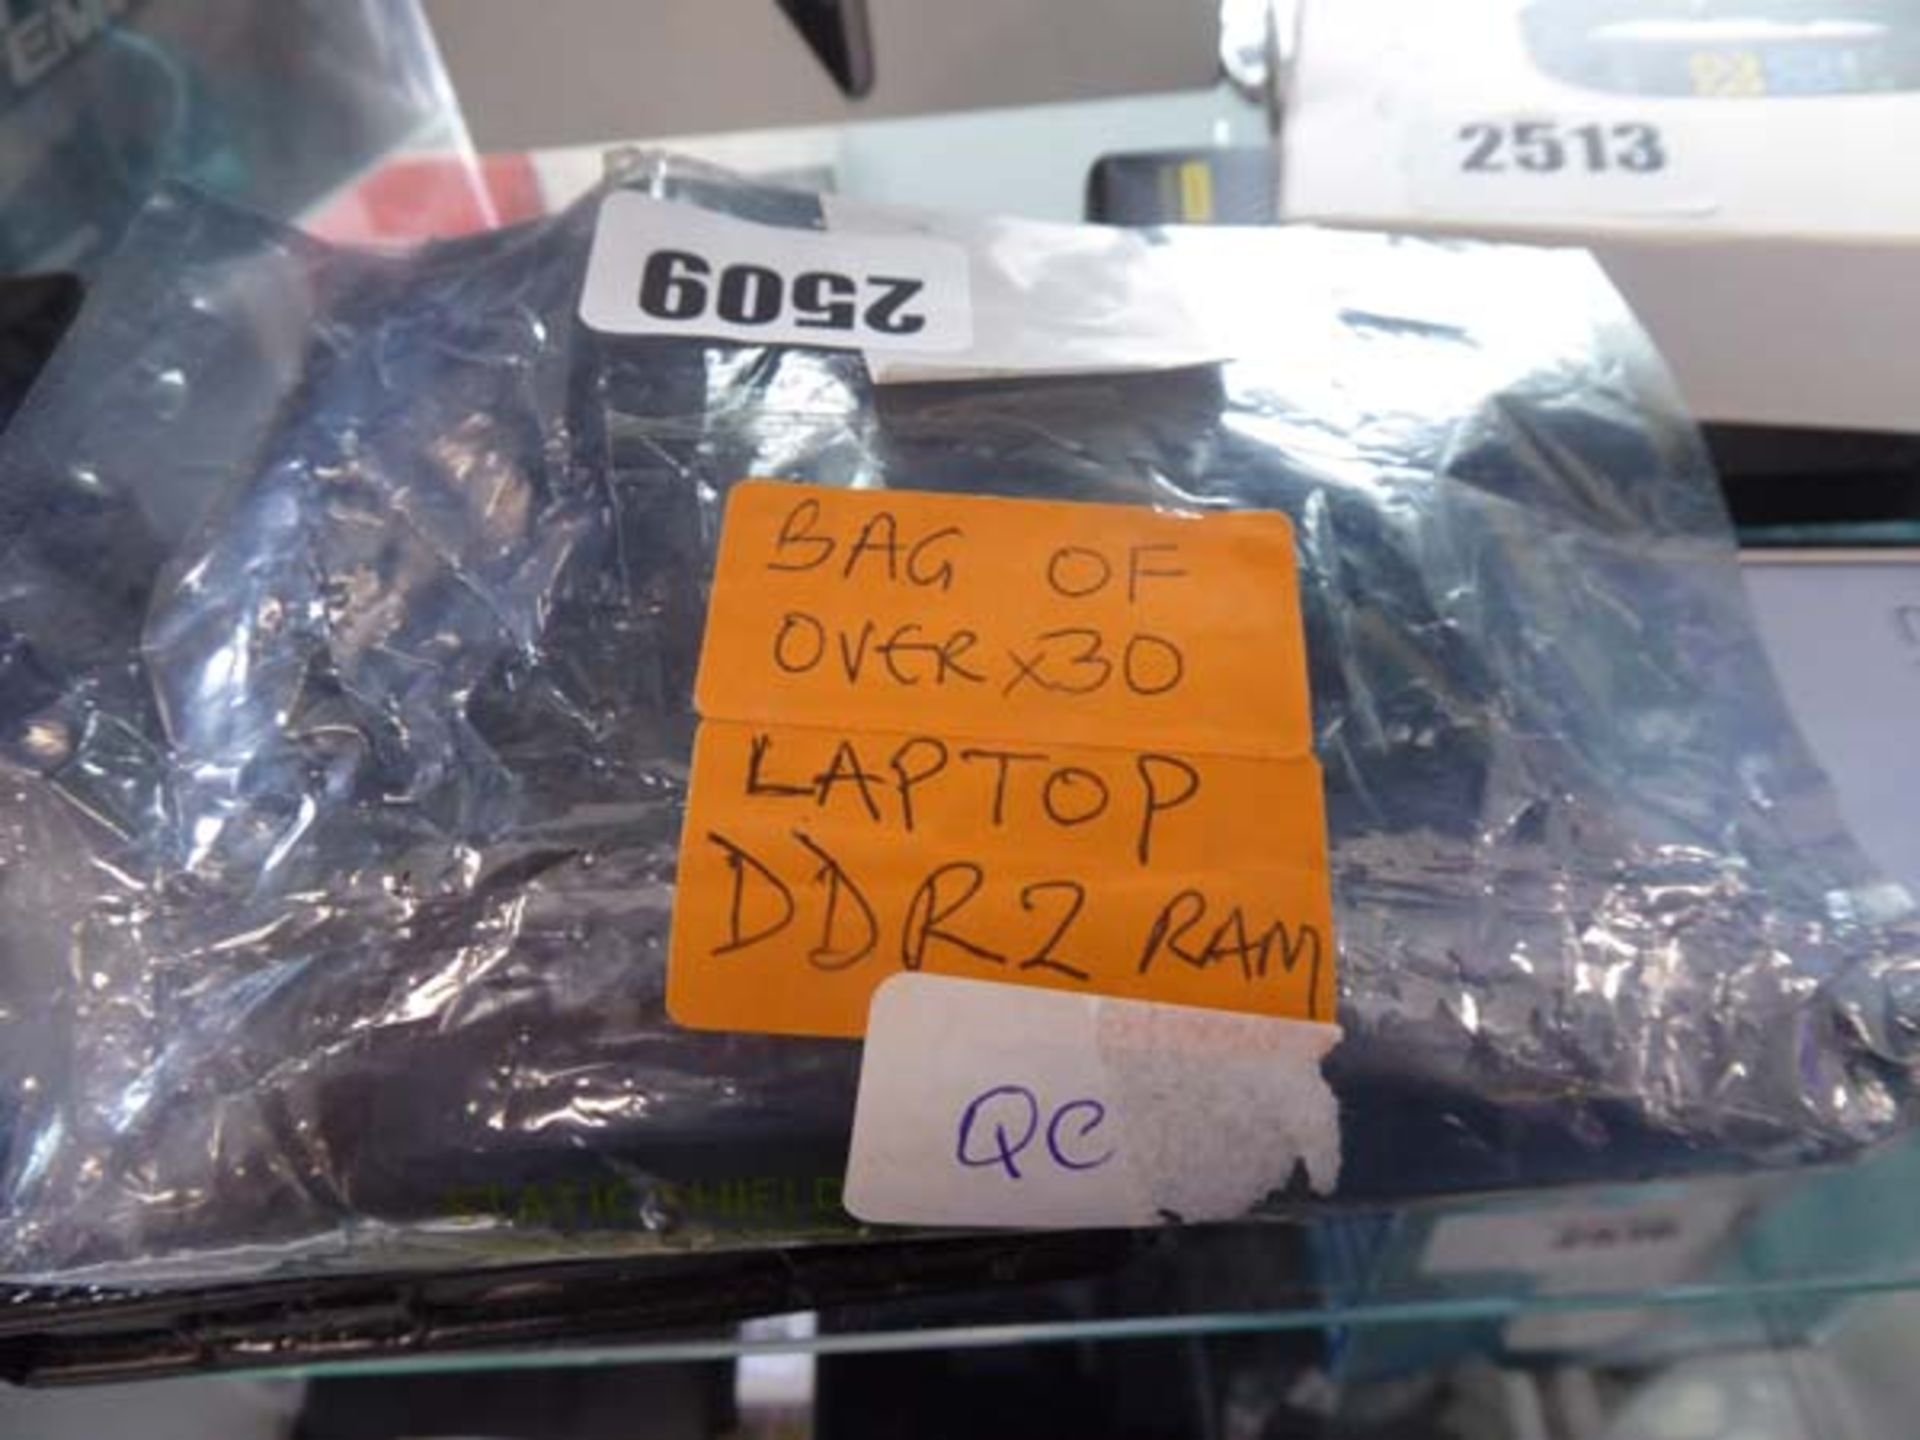 Bag containing approx 30 laptop DDr2 ram